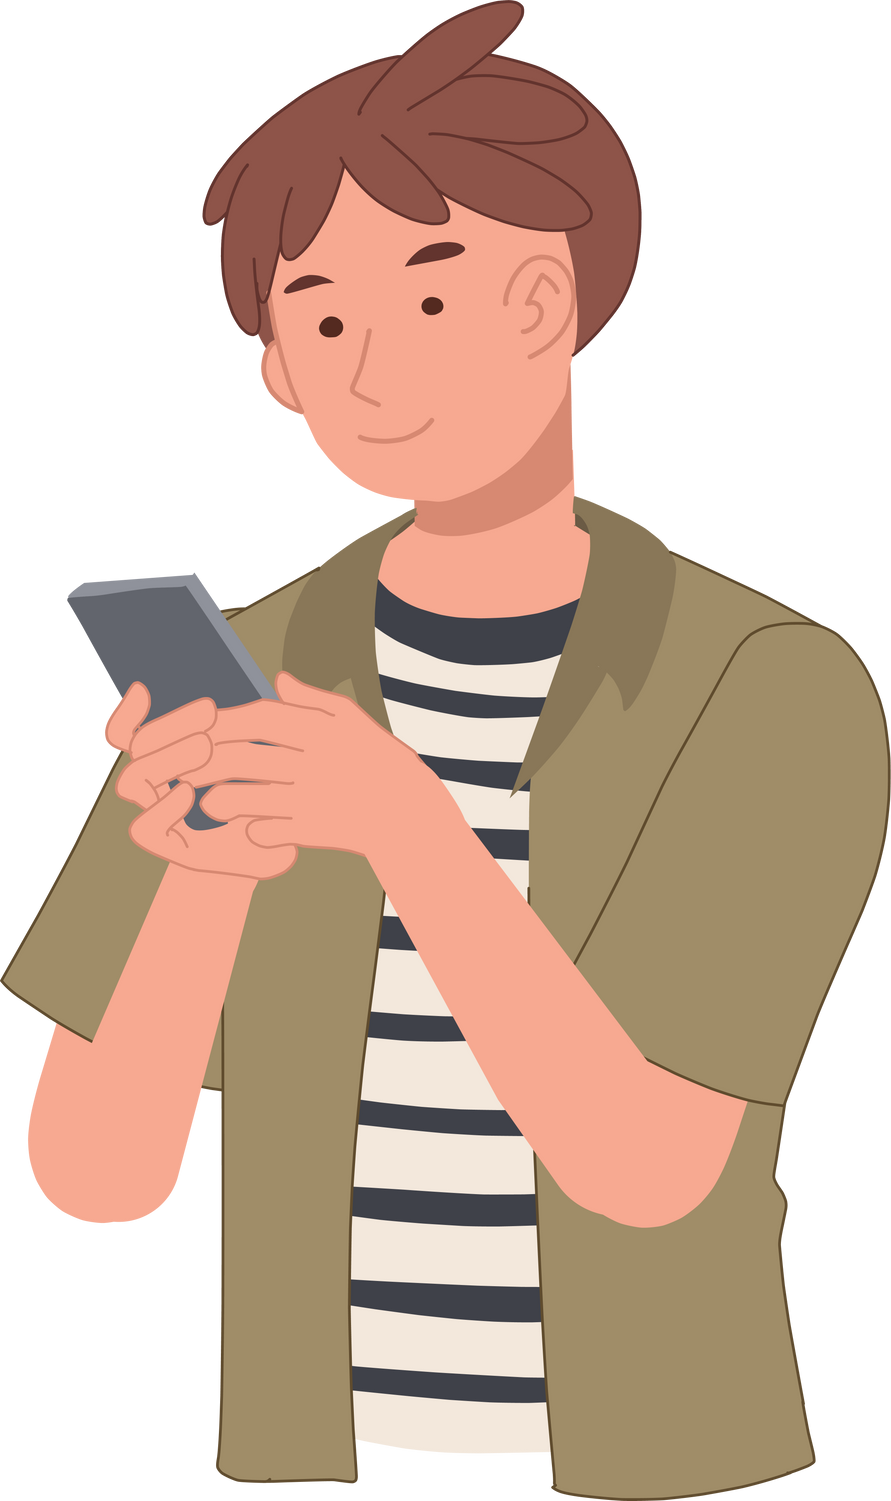 man holding mobile phone in hands. Online communication concept.